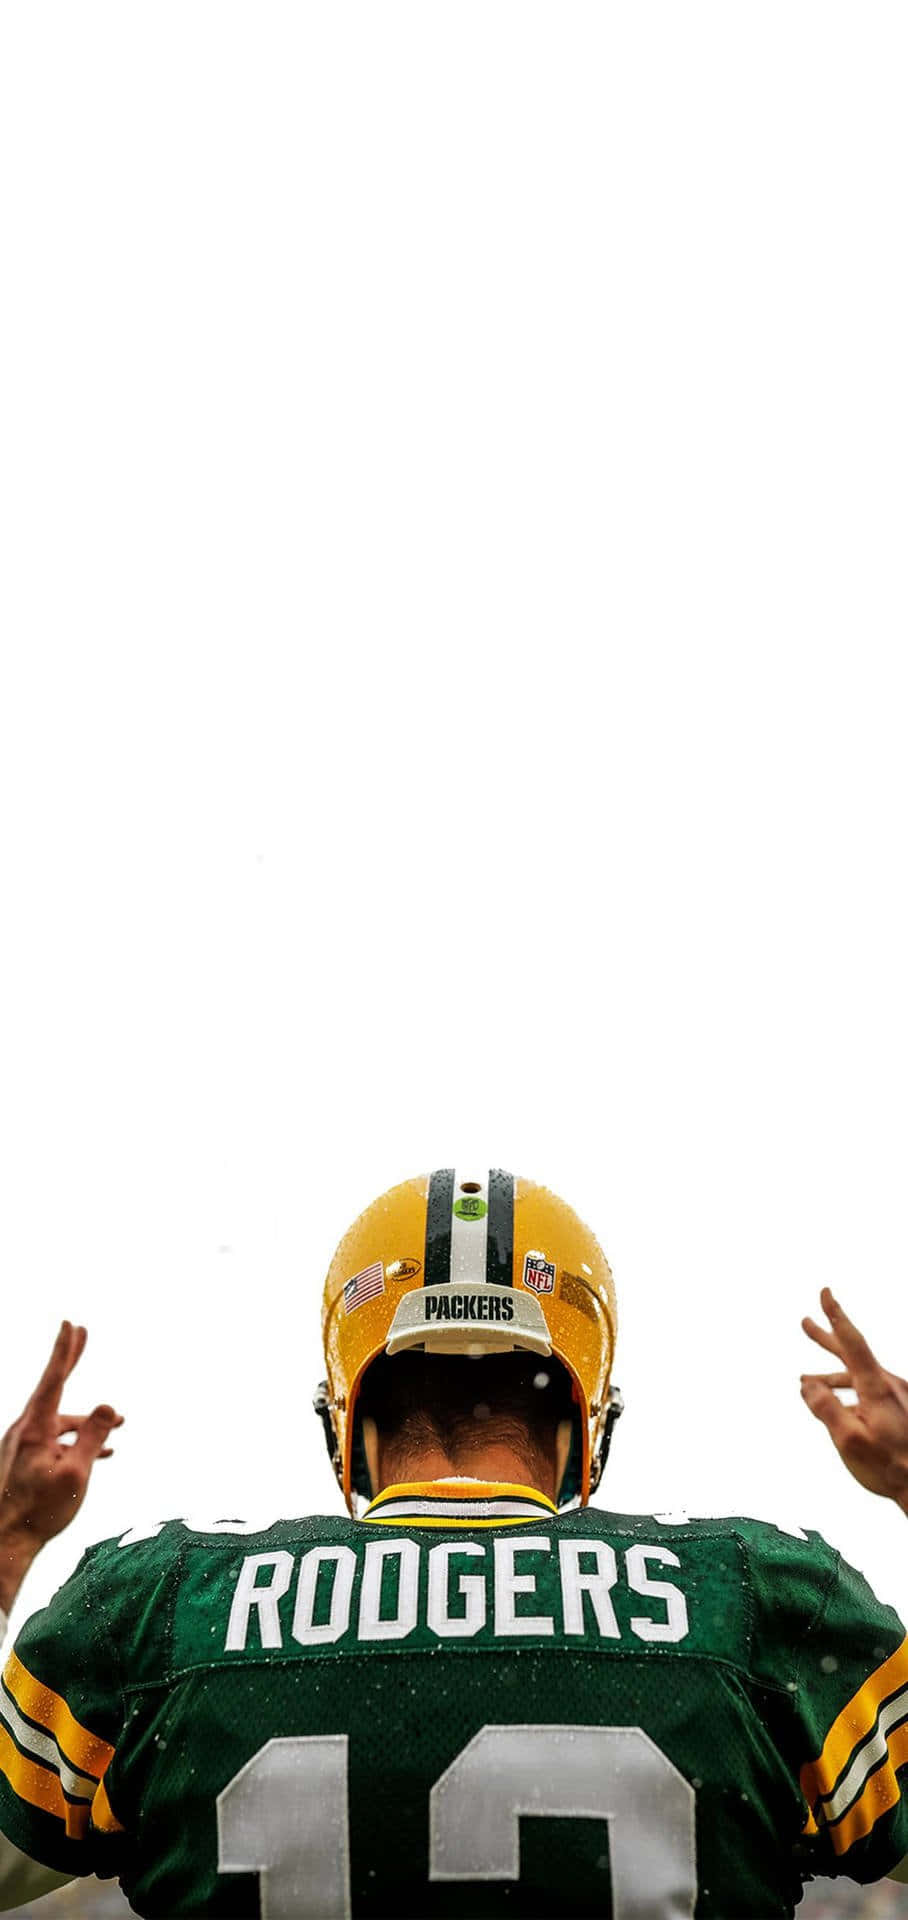 Papelde Parede Do Green Bay Packers 908 X 1920.